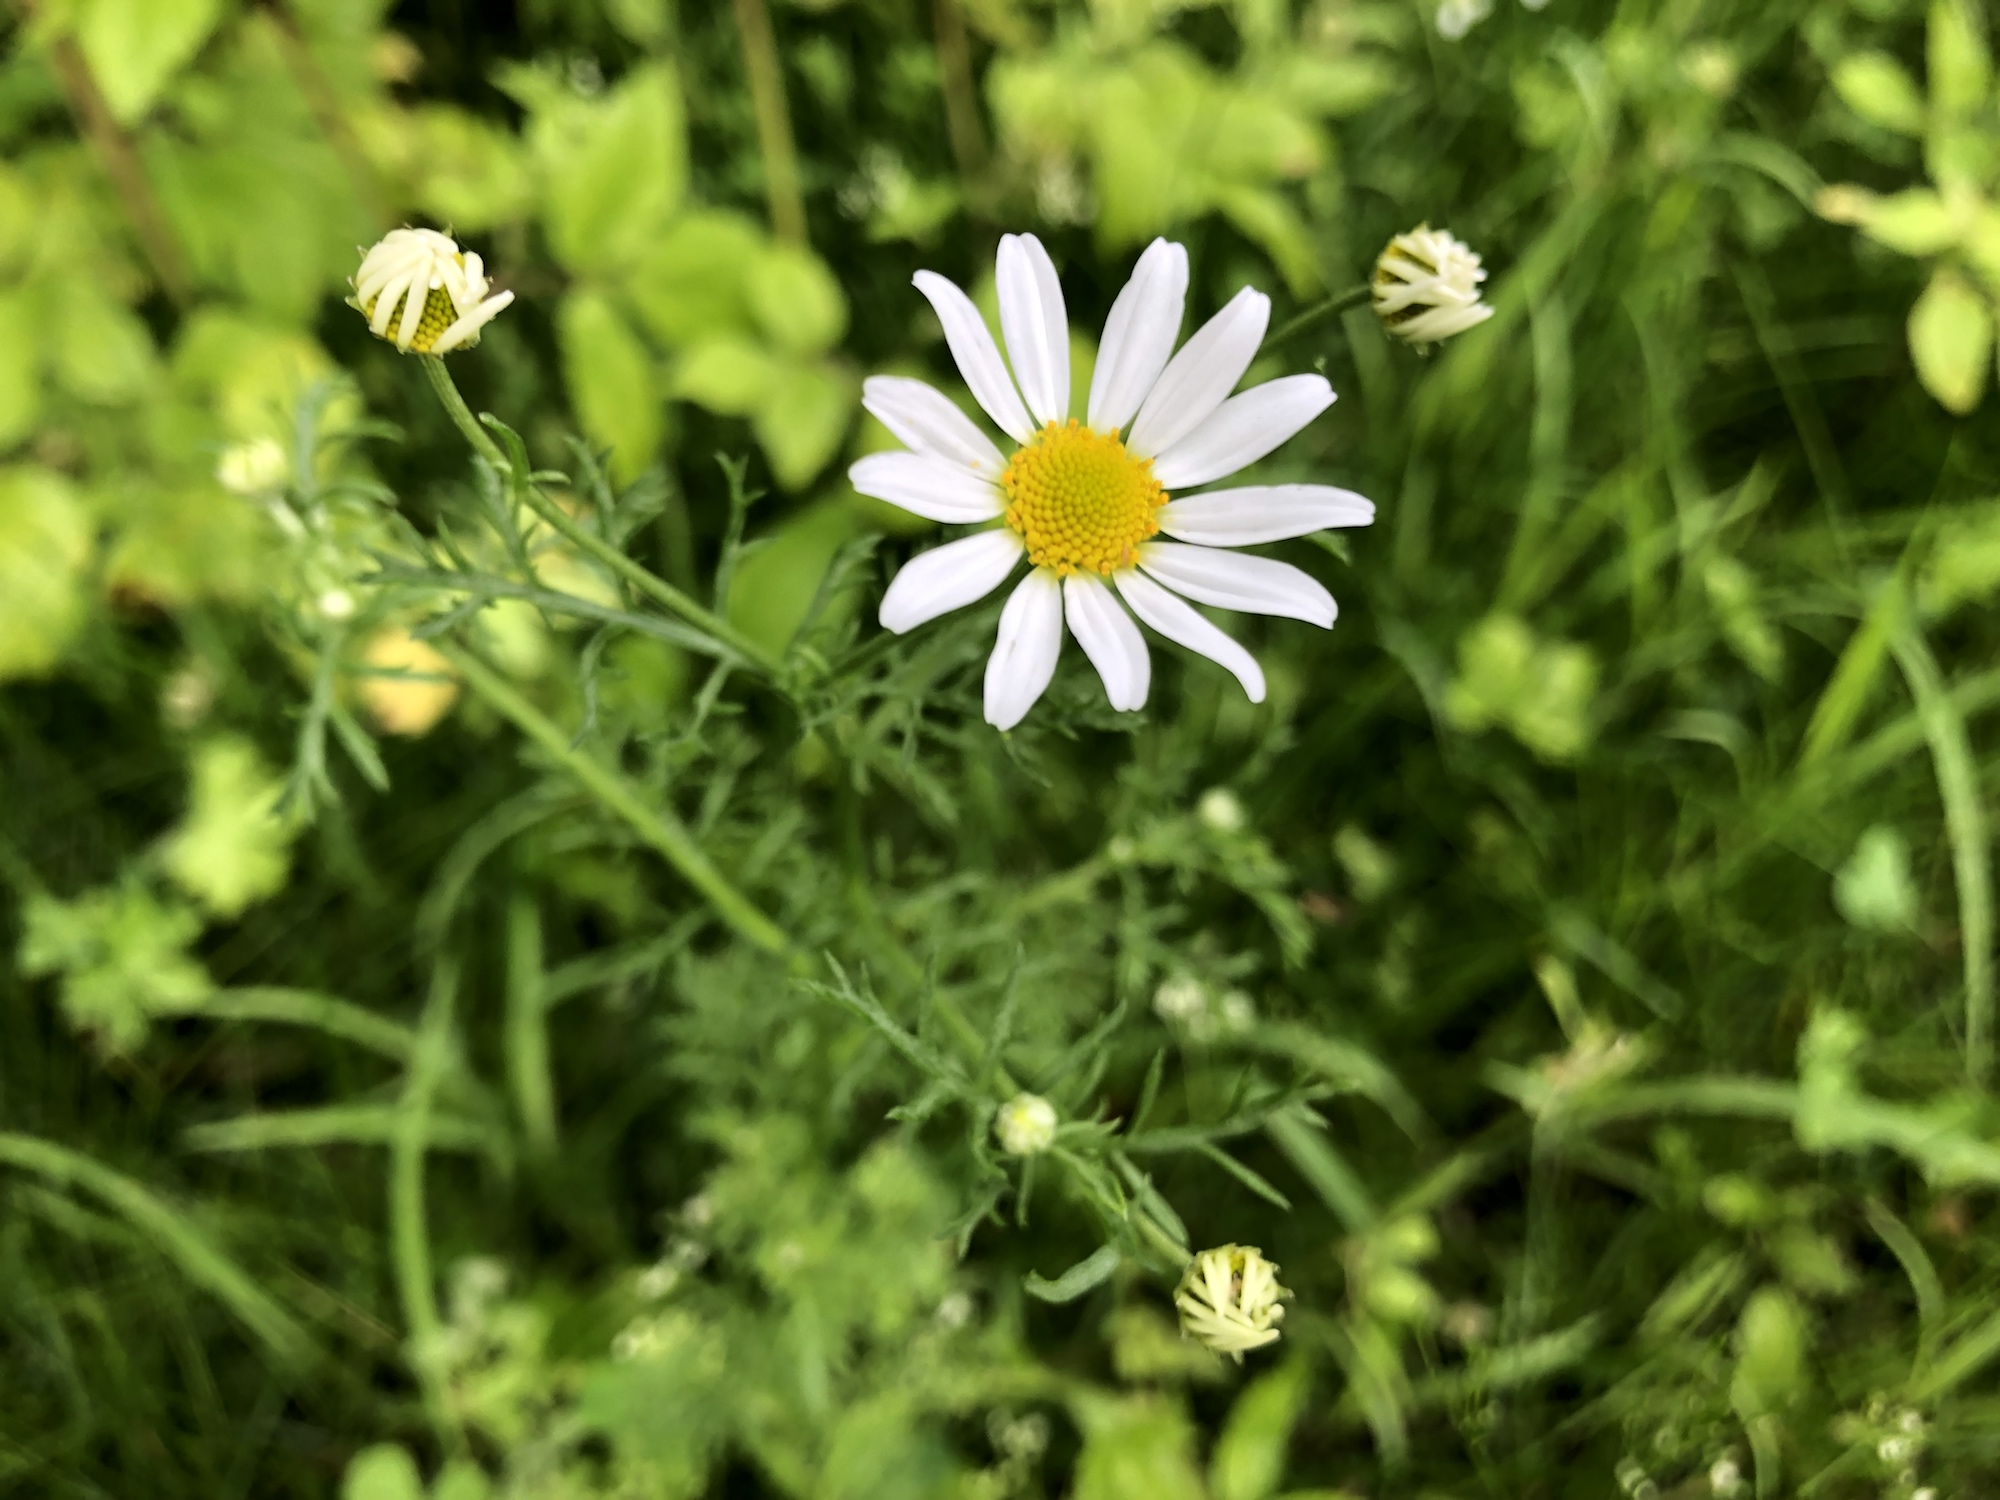 Chamomile in grass between Monroe Street sidewalk and Marion Dunn woods in Madison, Wisconsin on July 1, 2019.